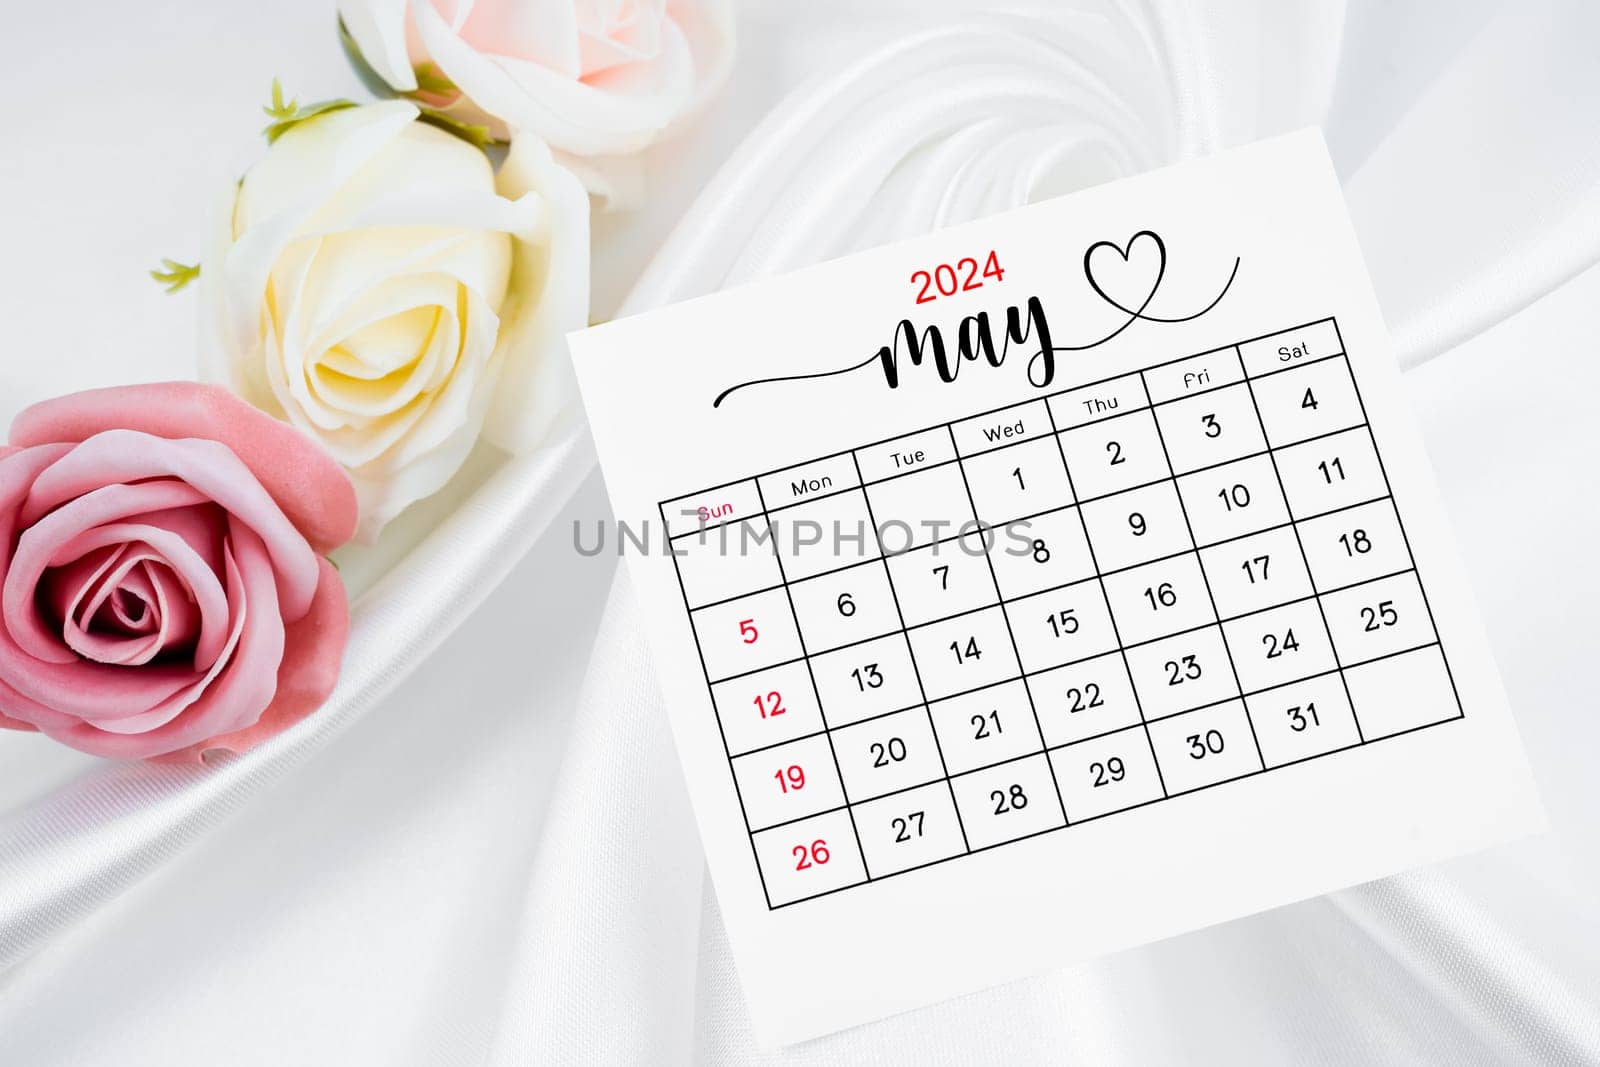 The May 2024 calendar page and rose flower on white satin textile background. by Gamjai